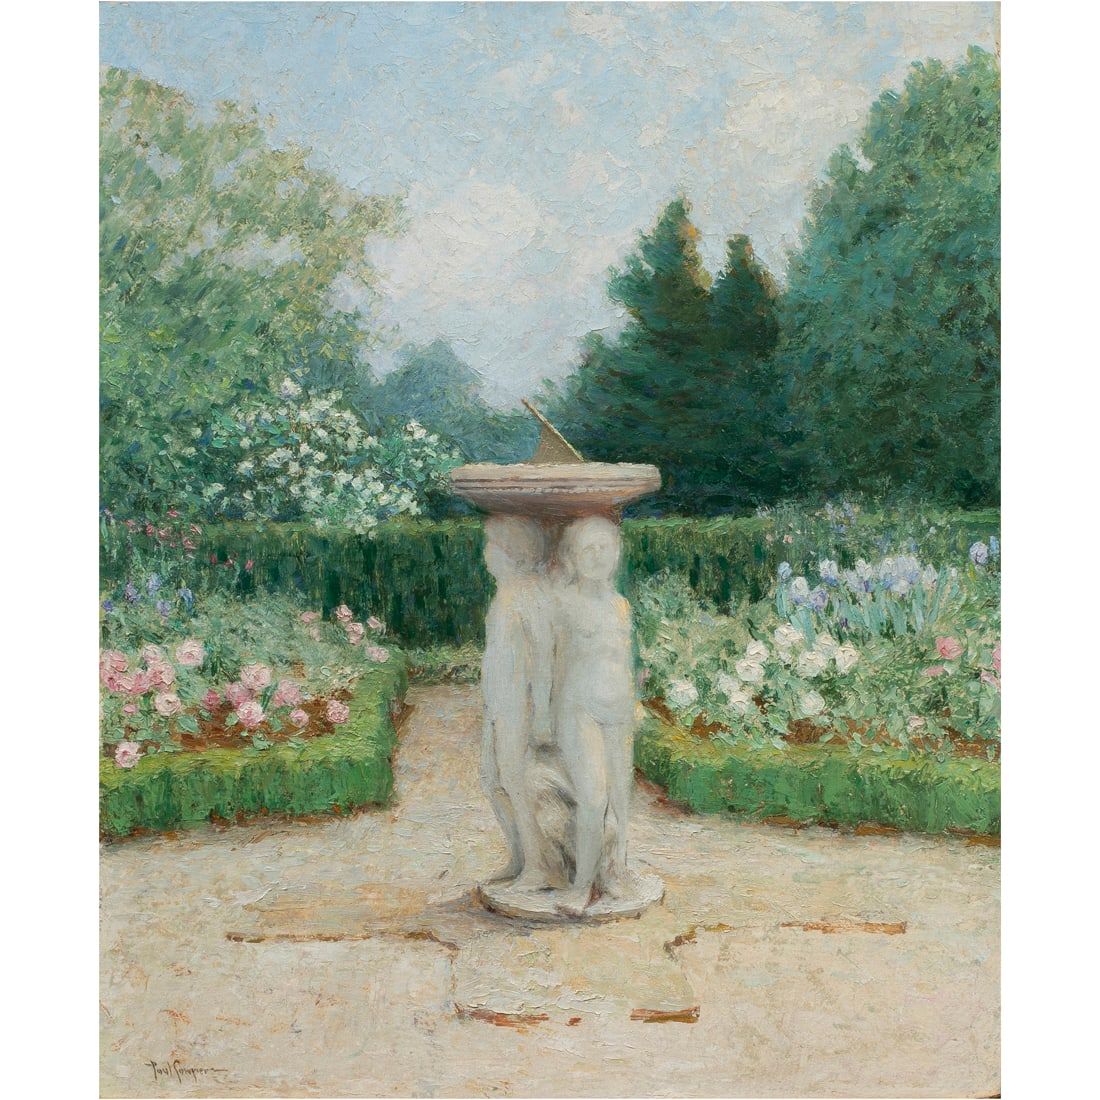 Paul Sawyier, ‘Fountain and Rose Garden,’ which hammered for $22,000 and sold for $28,820 with buyer’s premium at Clars Auction Gallery.